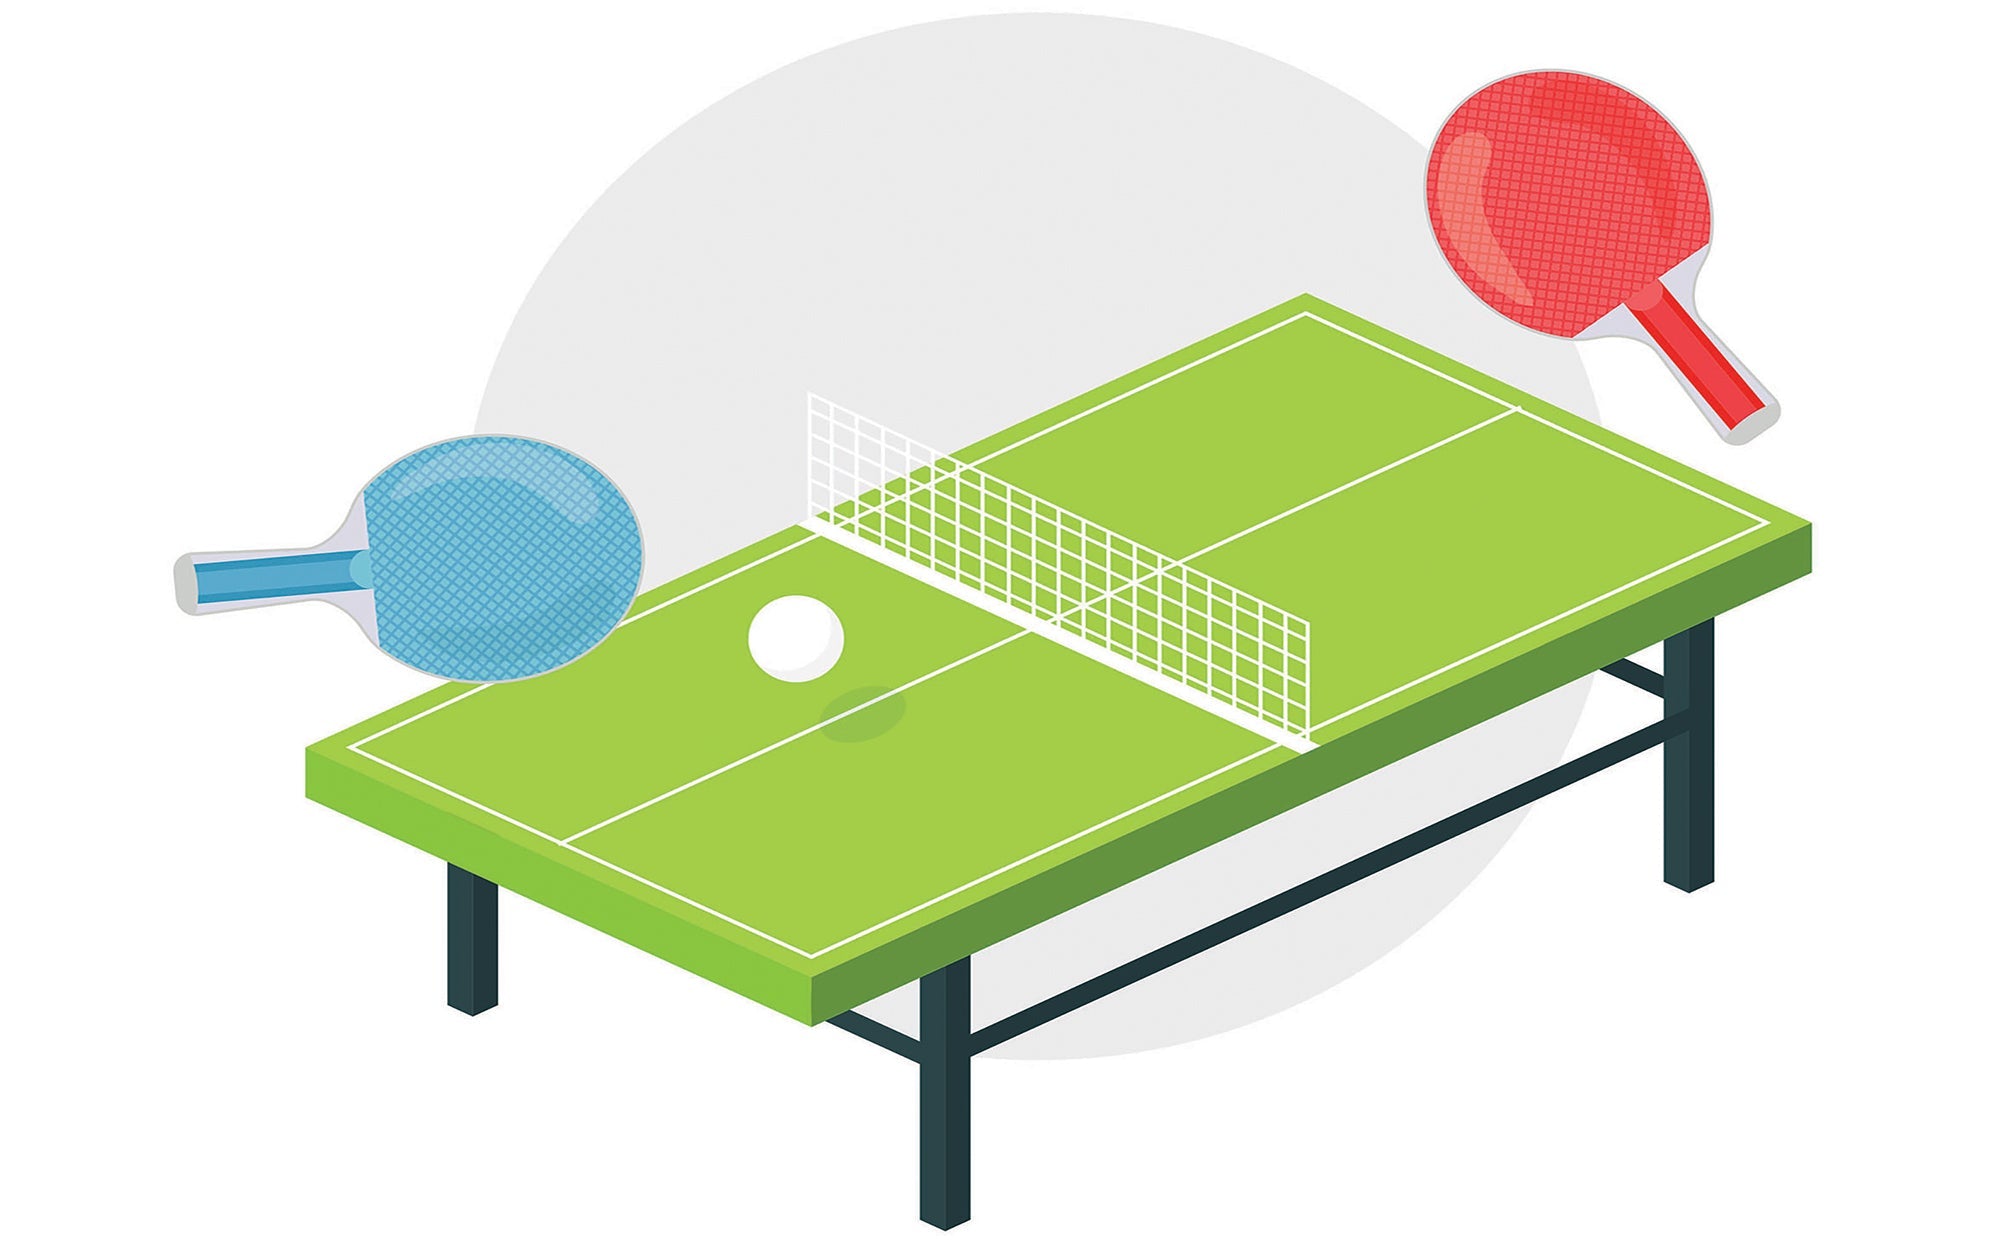 An isometric illustration of a table tennis setup with two paddles and a ball on a green table